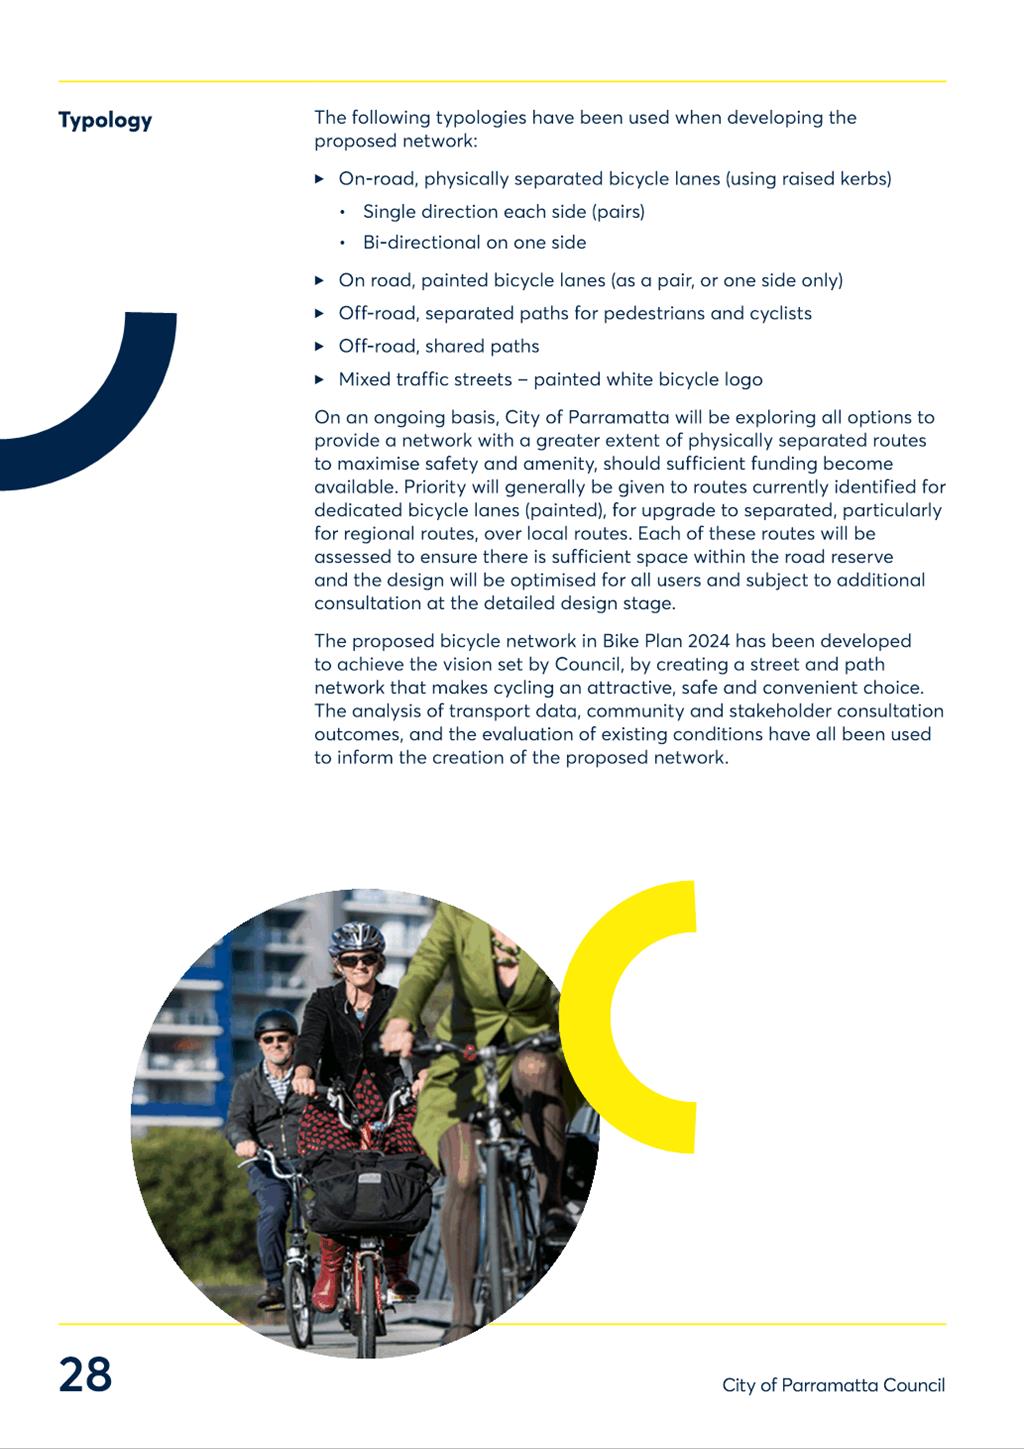 A brochure with people riding bicycles

Description automatically generated